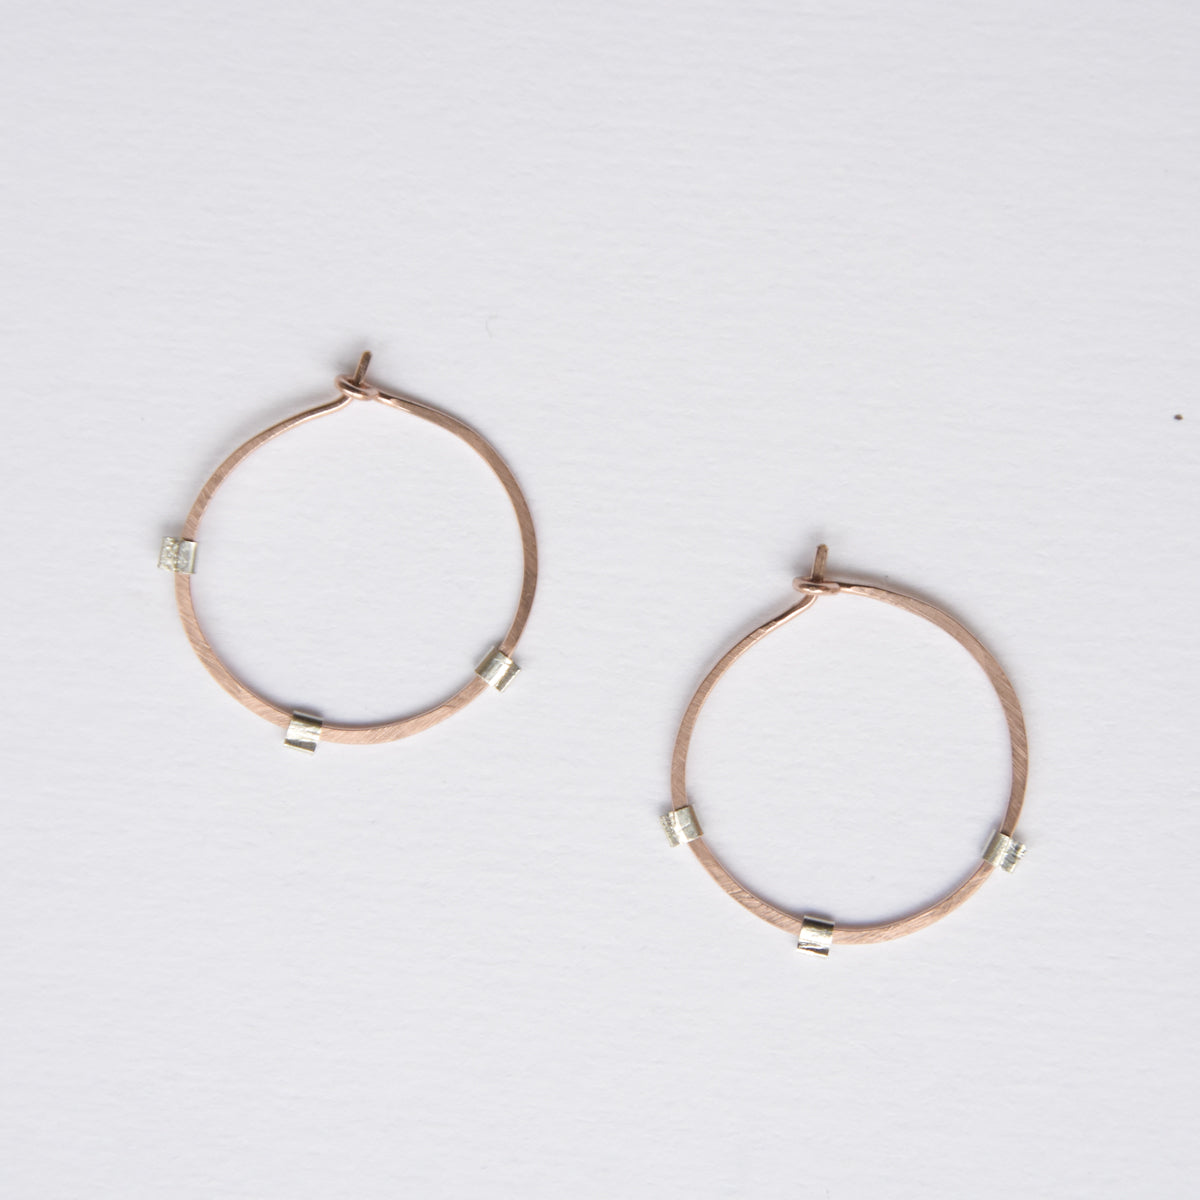 Modern hoop earrings for going out. Rose gold earrings for Valentine's Day, Feb 14th jewelry gift